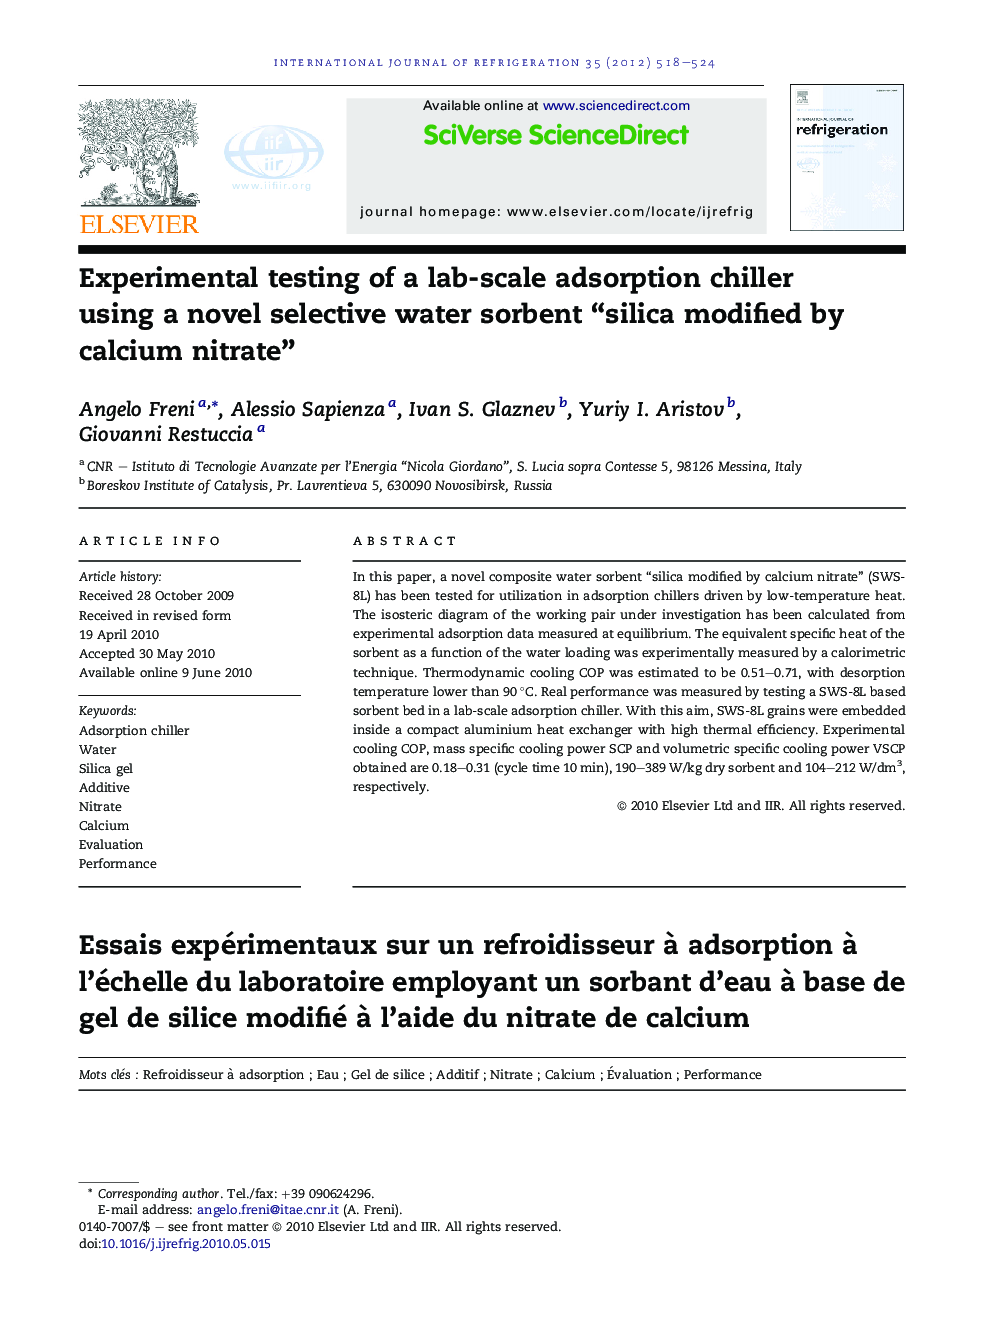 Experimental testing of a lab-scale adsorption chiller using a novel selective water sorbent “silica modified by calcium nitrate”